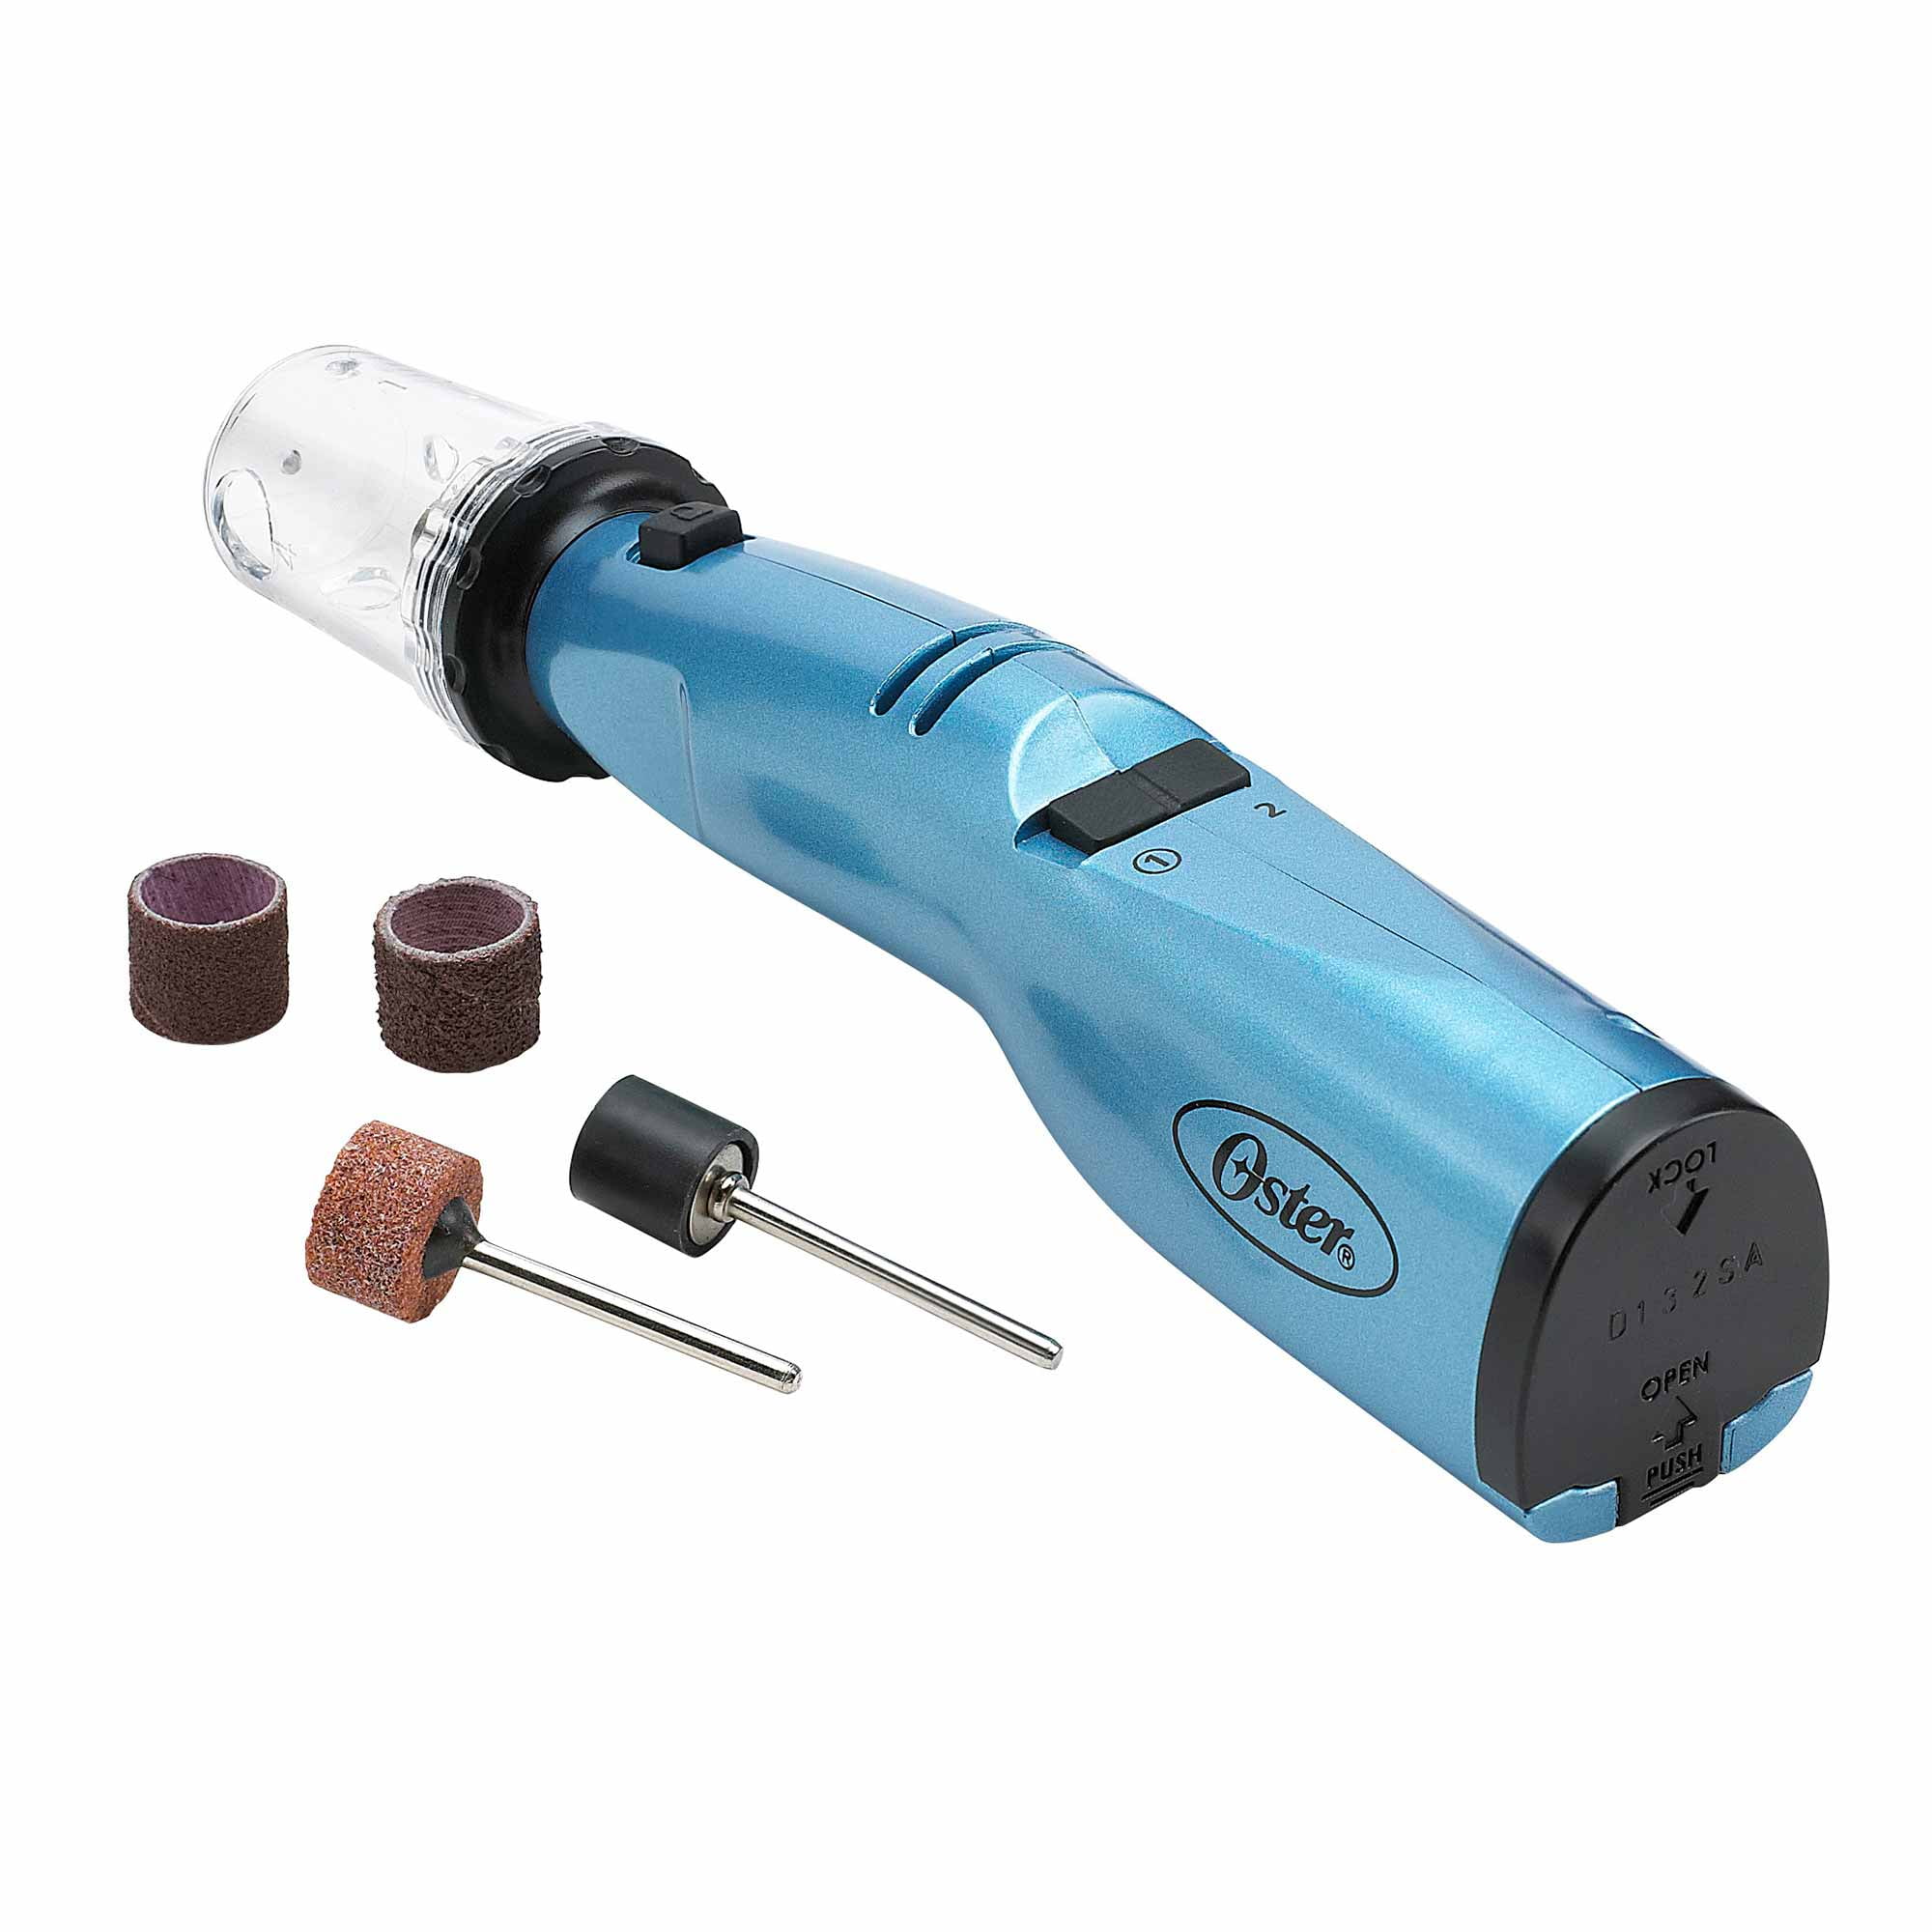 power dog nail trimmer